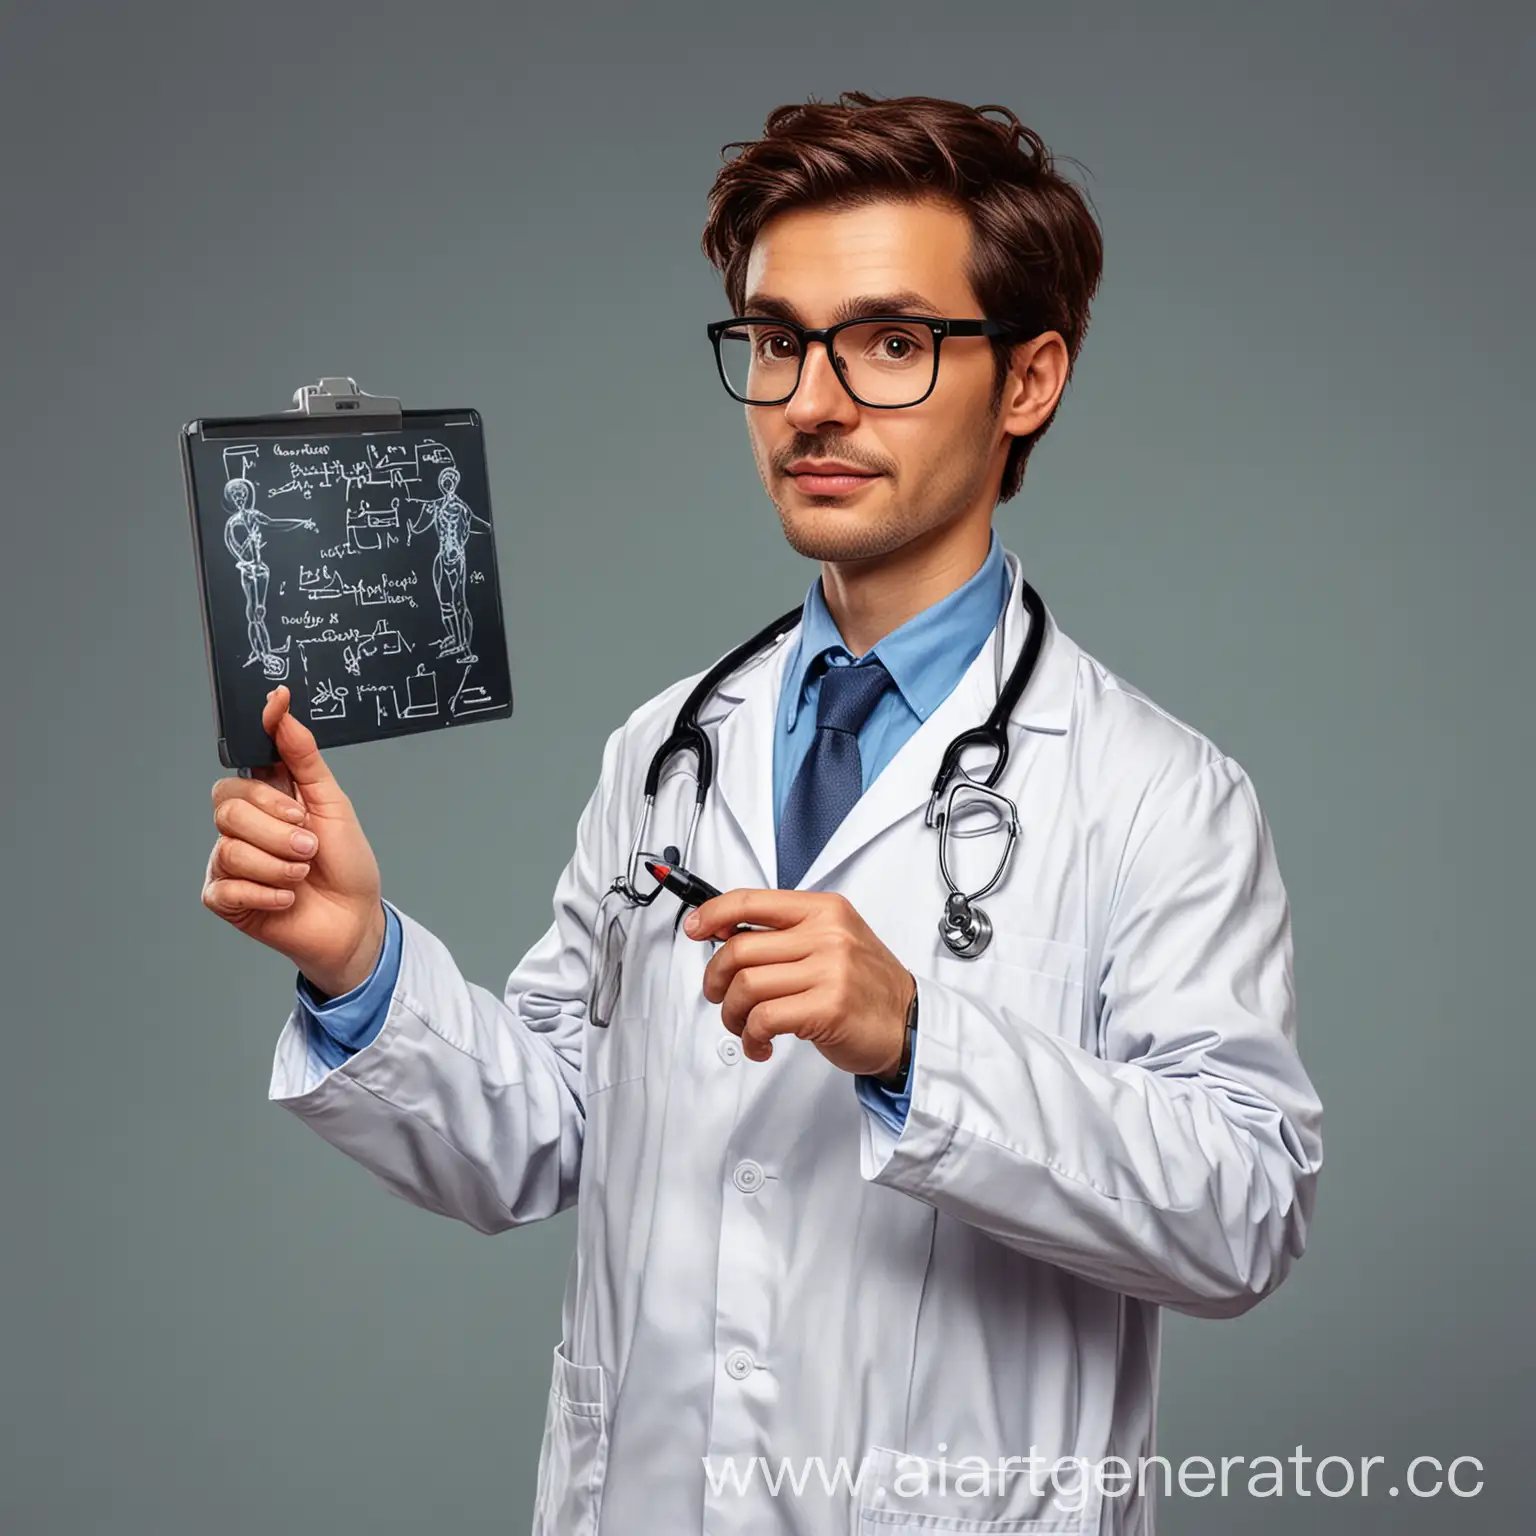 Doctor-Blogger: An illustration of a doctor recording videos about medical innovations, holding a marker board.